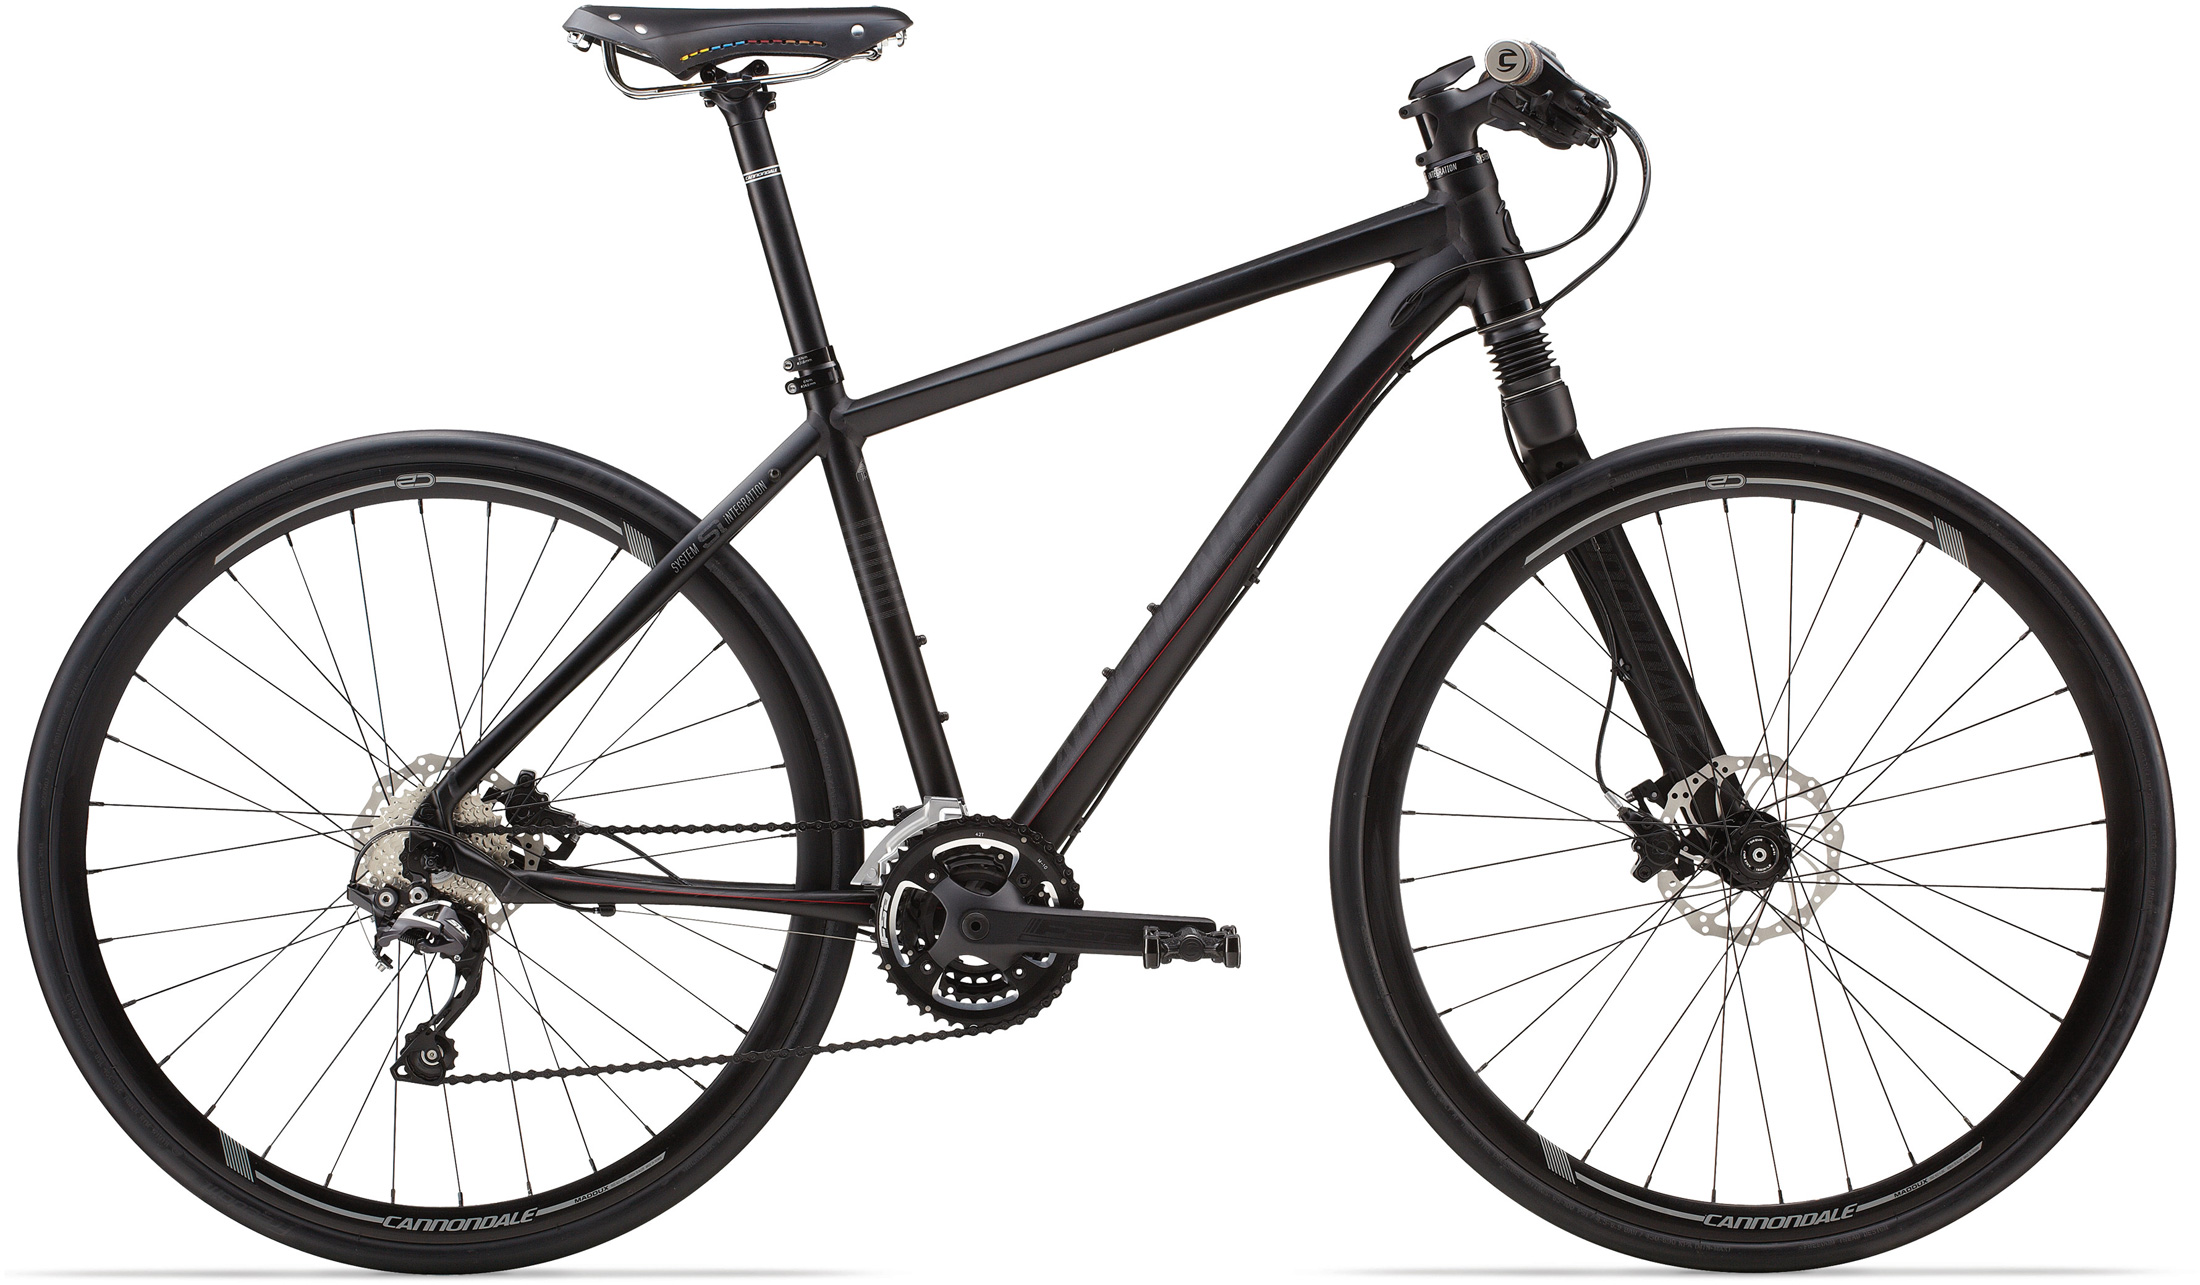 2017 Cannondale Bad Boy 1 - Bicycle 